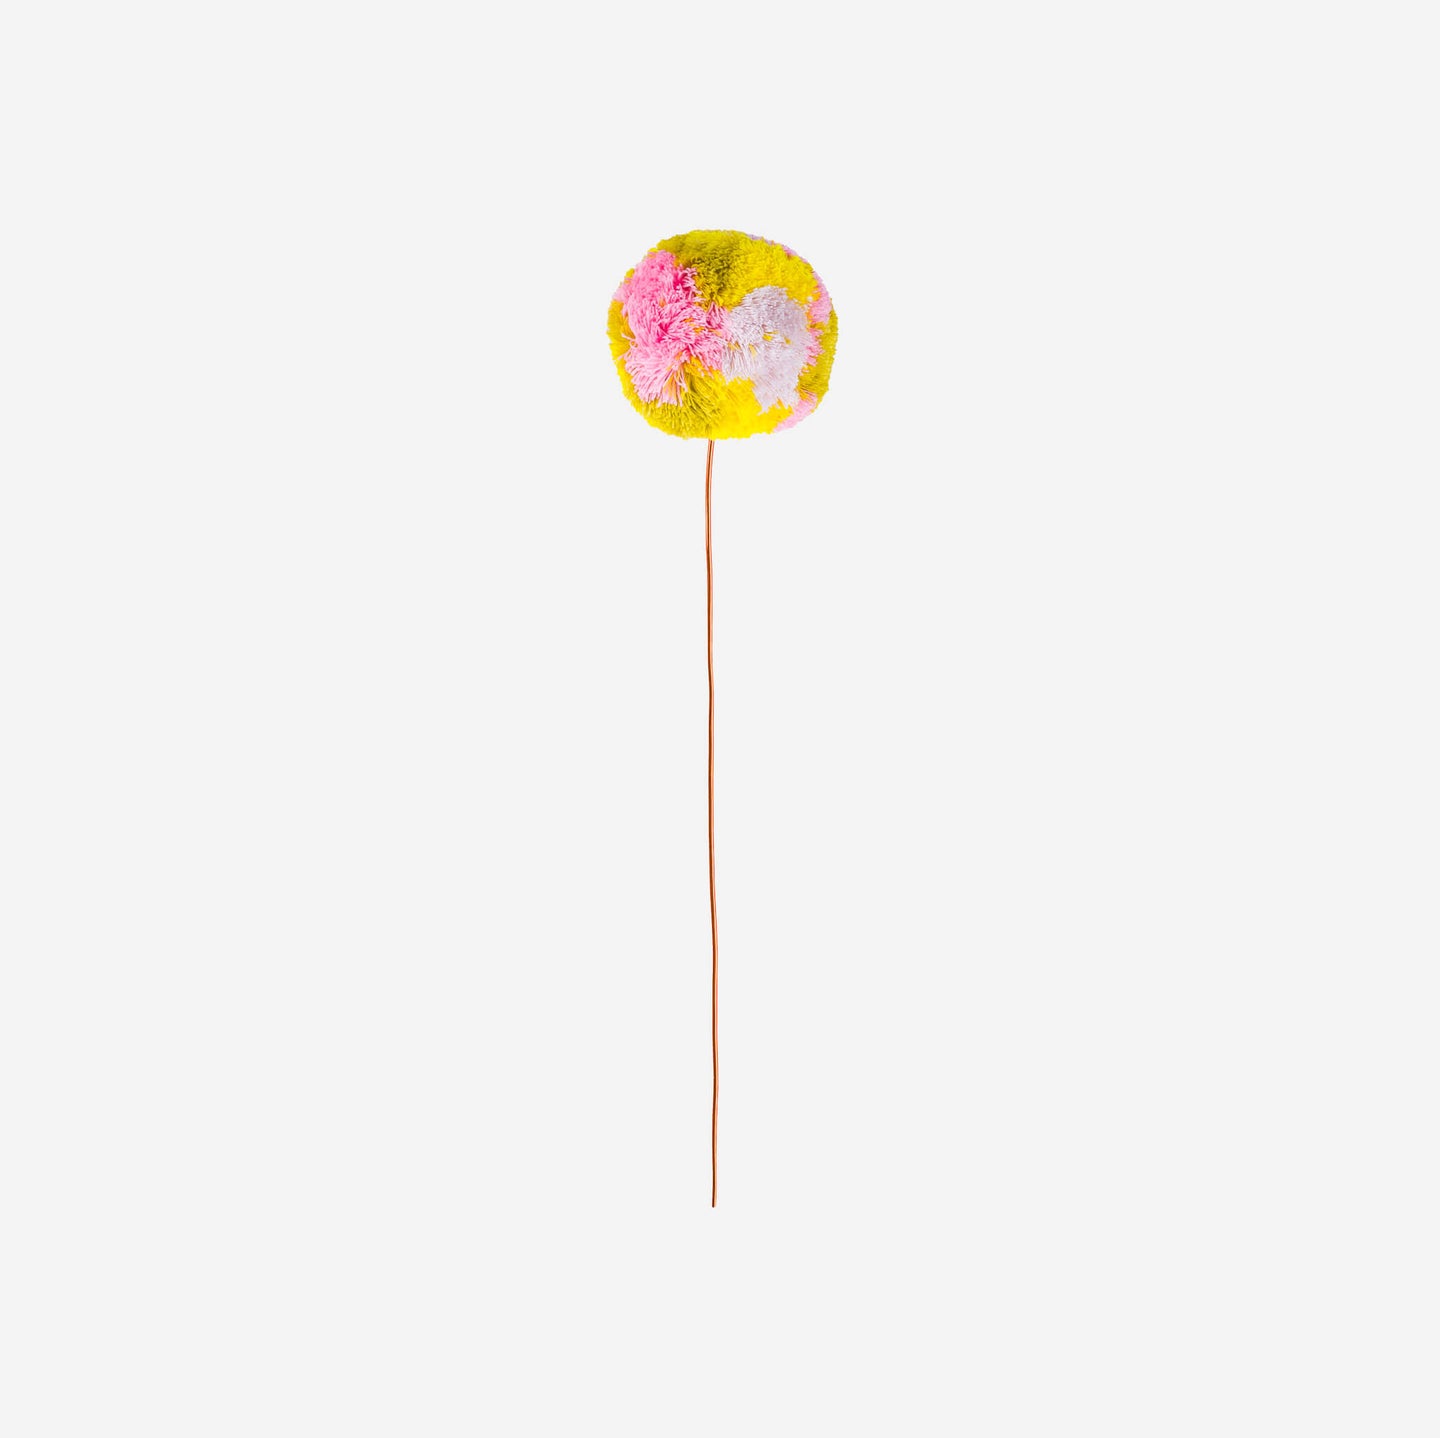 colored knitted pom pom on a wire with a white background